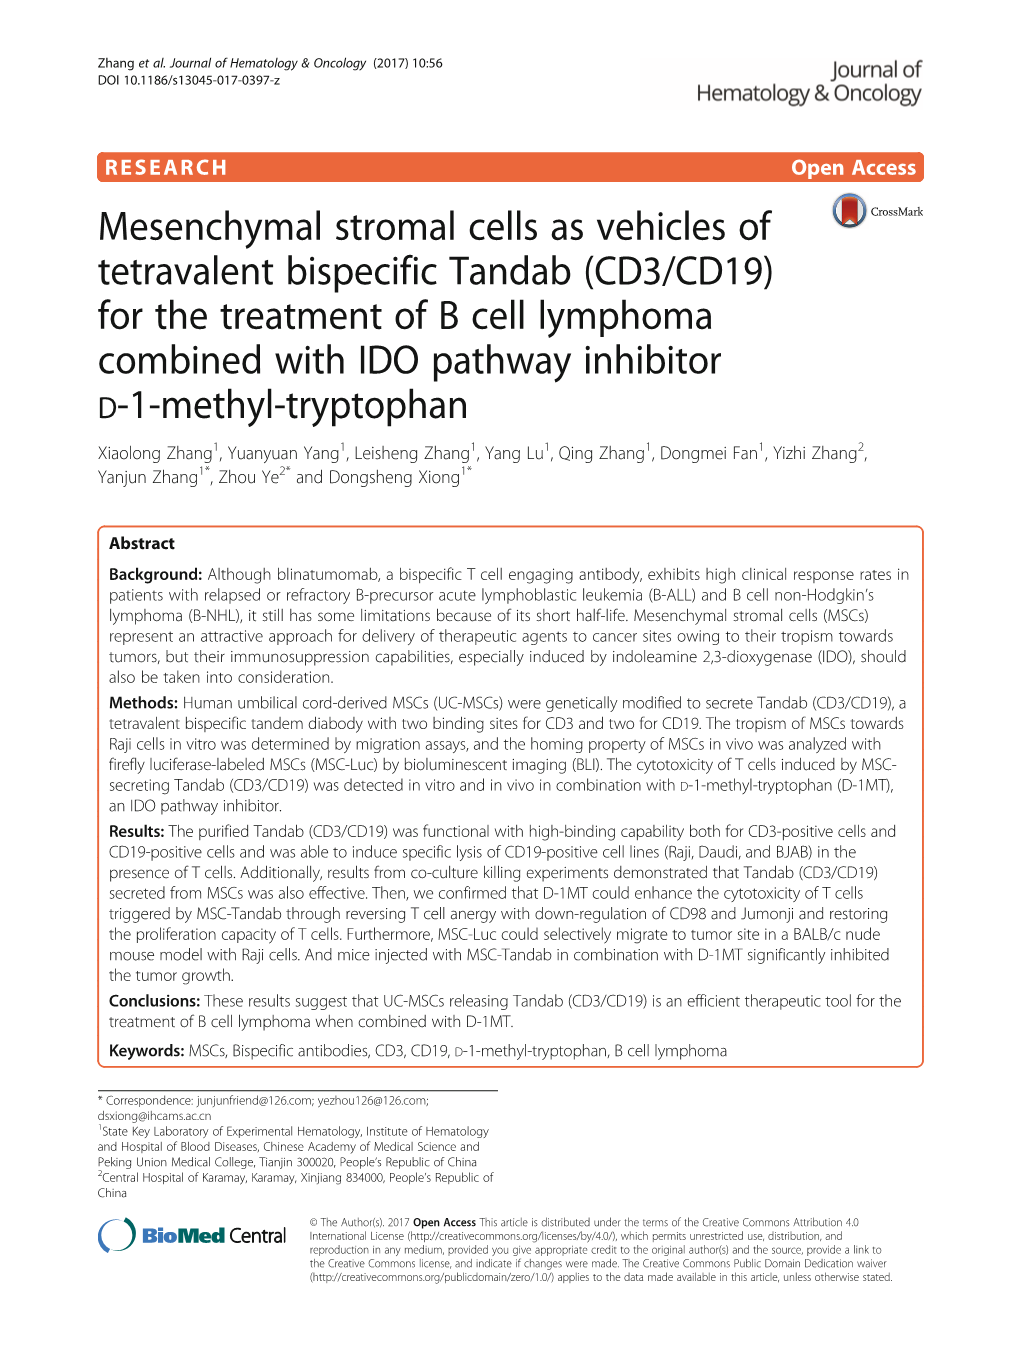 Mesenchymal Stromal Cells As Vehicles of Tetravalent Bispecific Tandab (CD3/CD19) for the Treatment of B Cell Lymphoma Combined